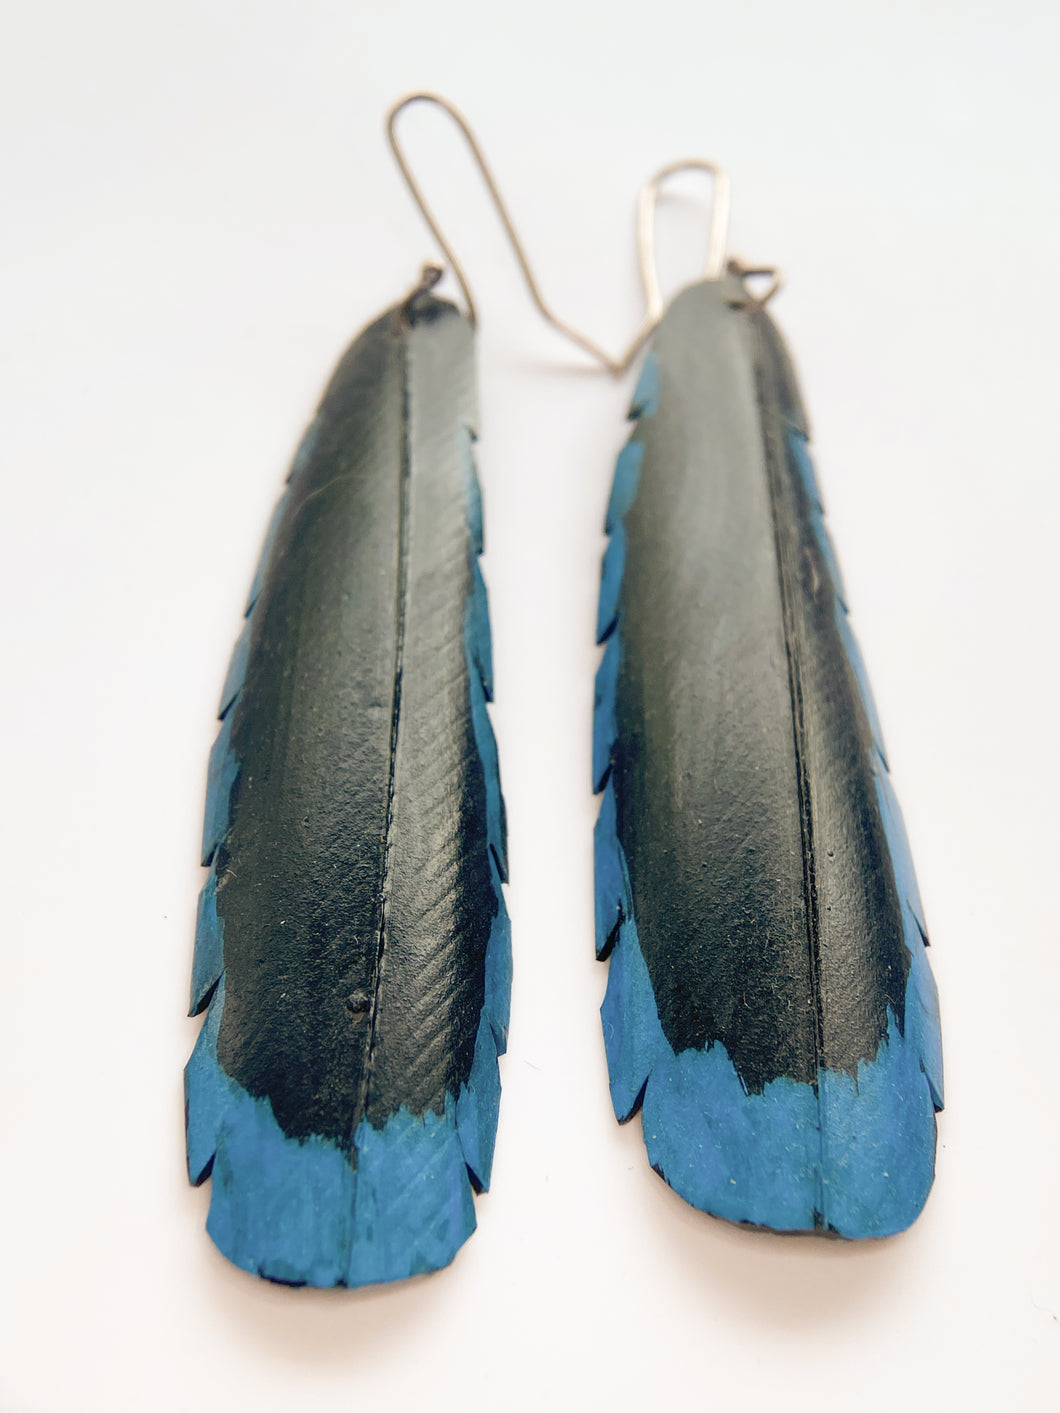 Quirky Rubber Earrings by Diane Connal